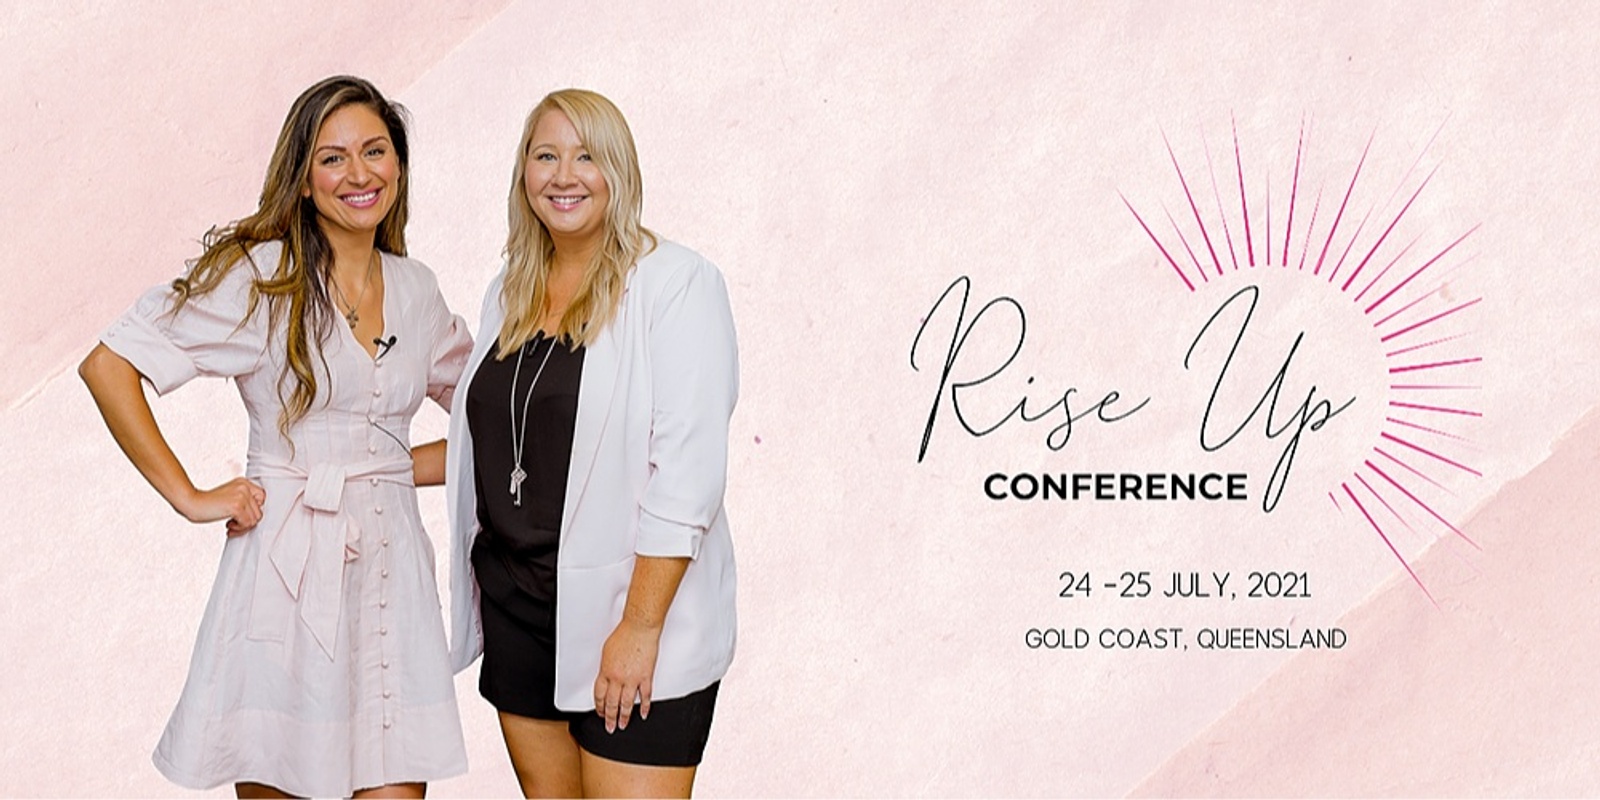 Banner image for The RISE UP CONFERENCE - Gold Coast